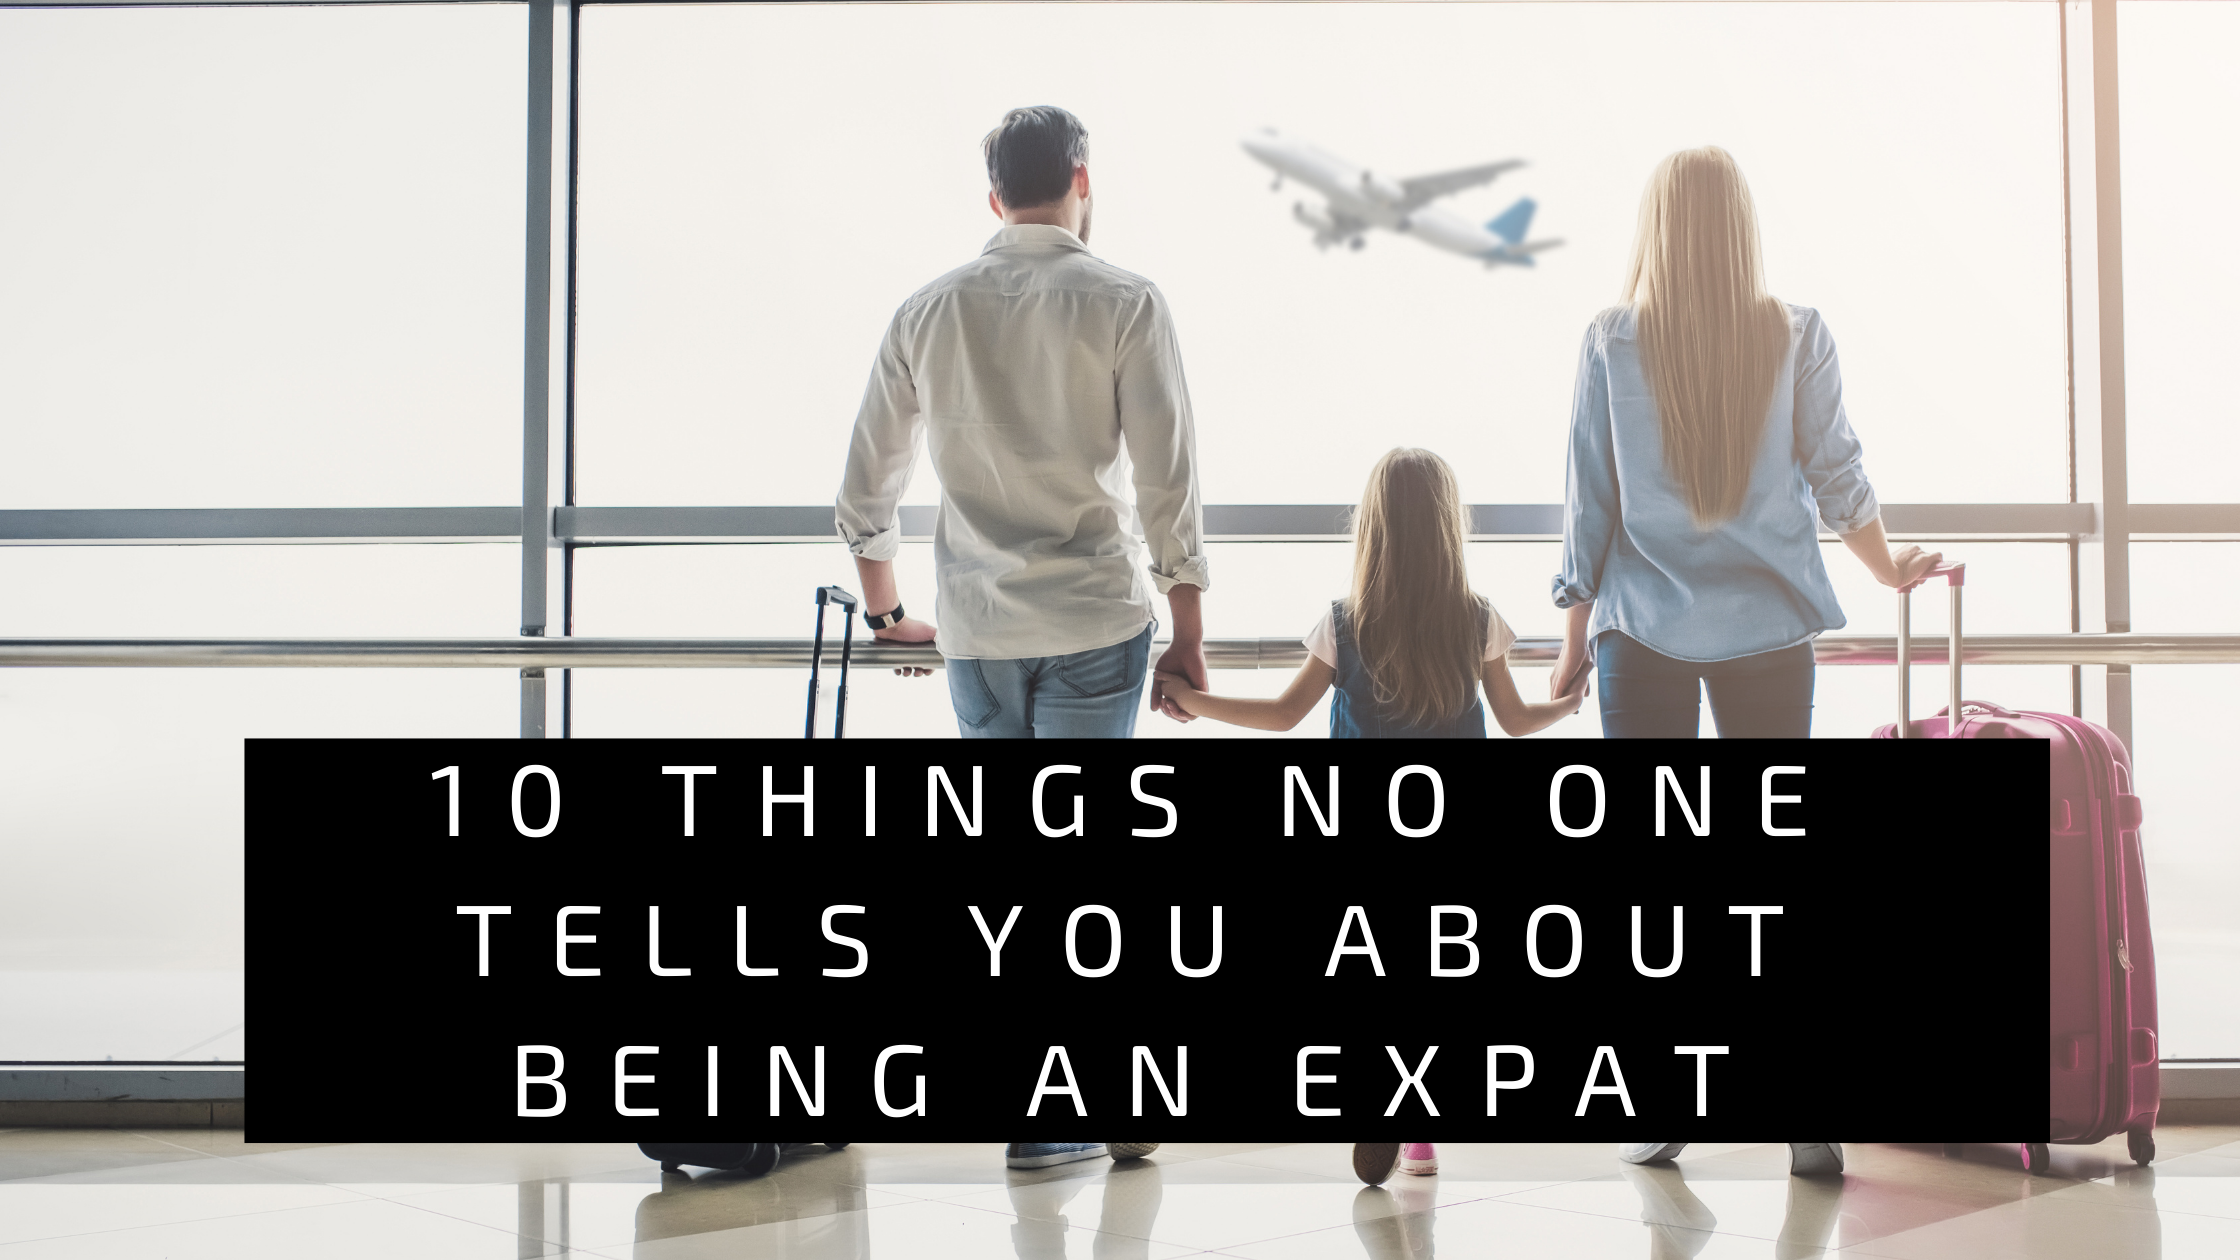 10 things no one tells you about being an Expat